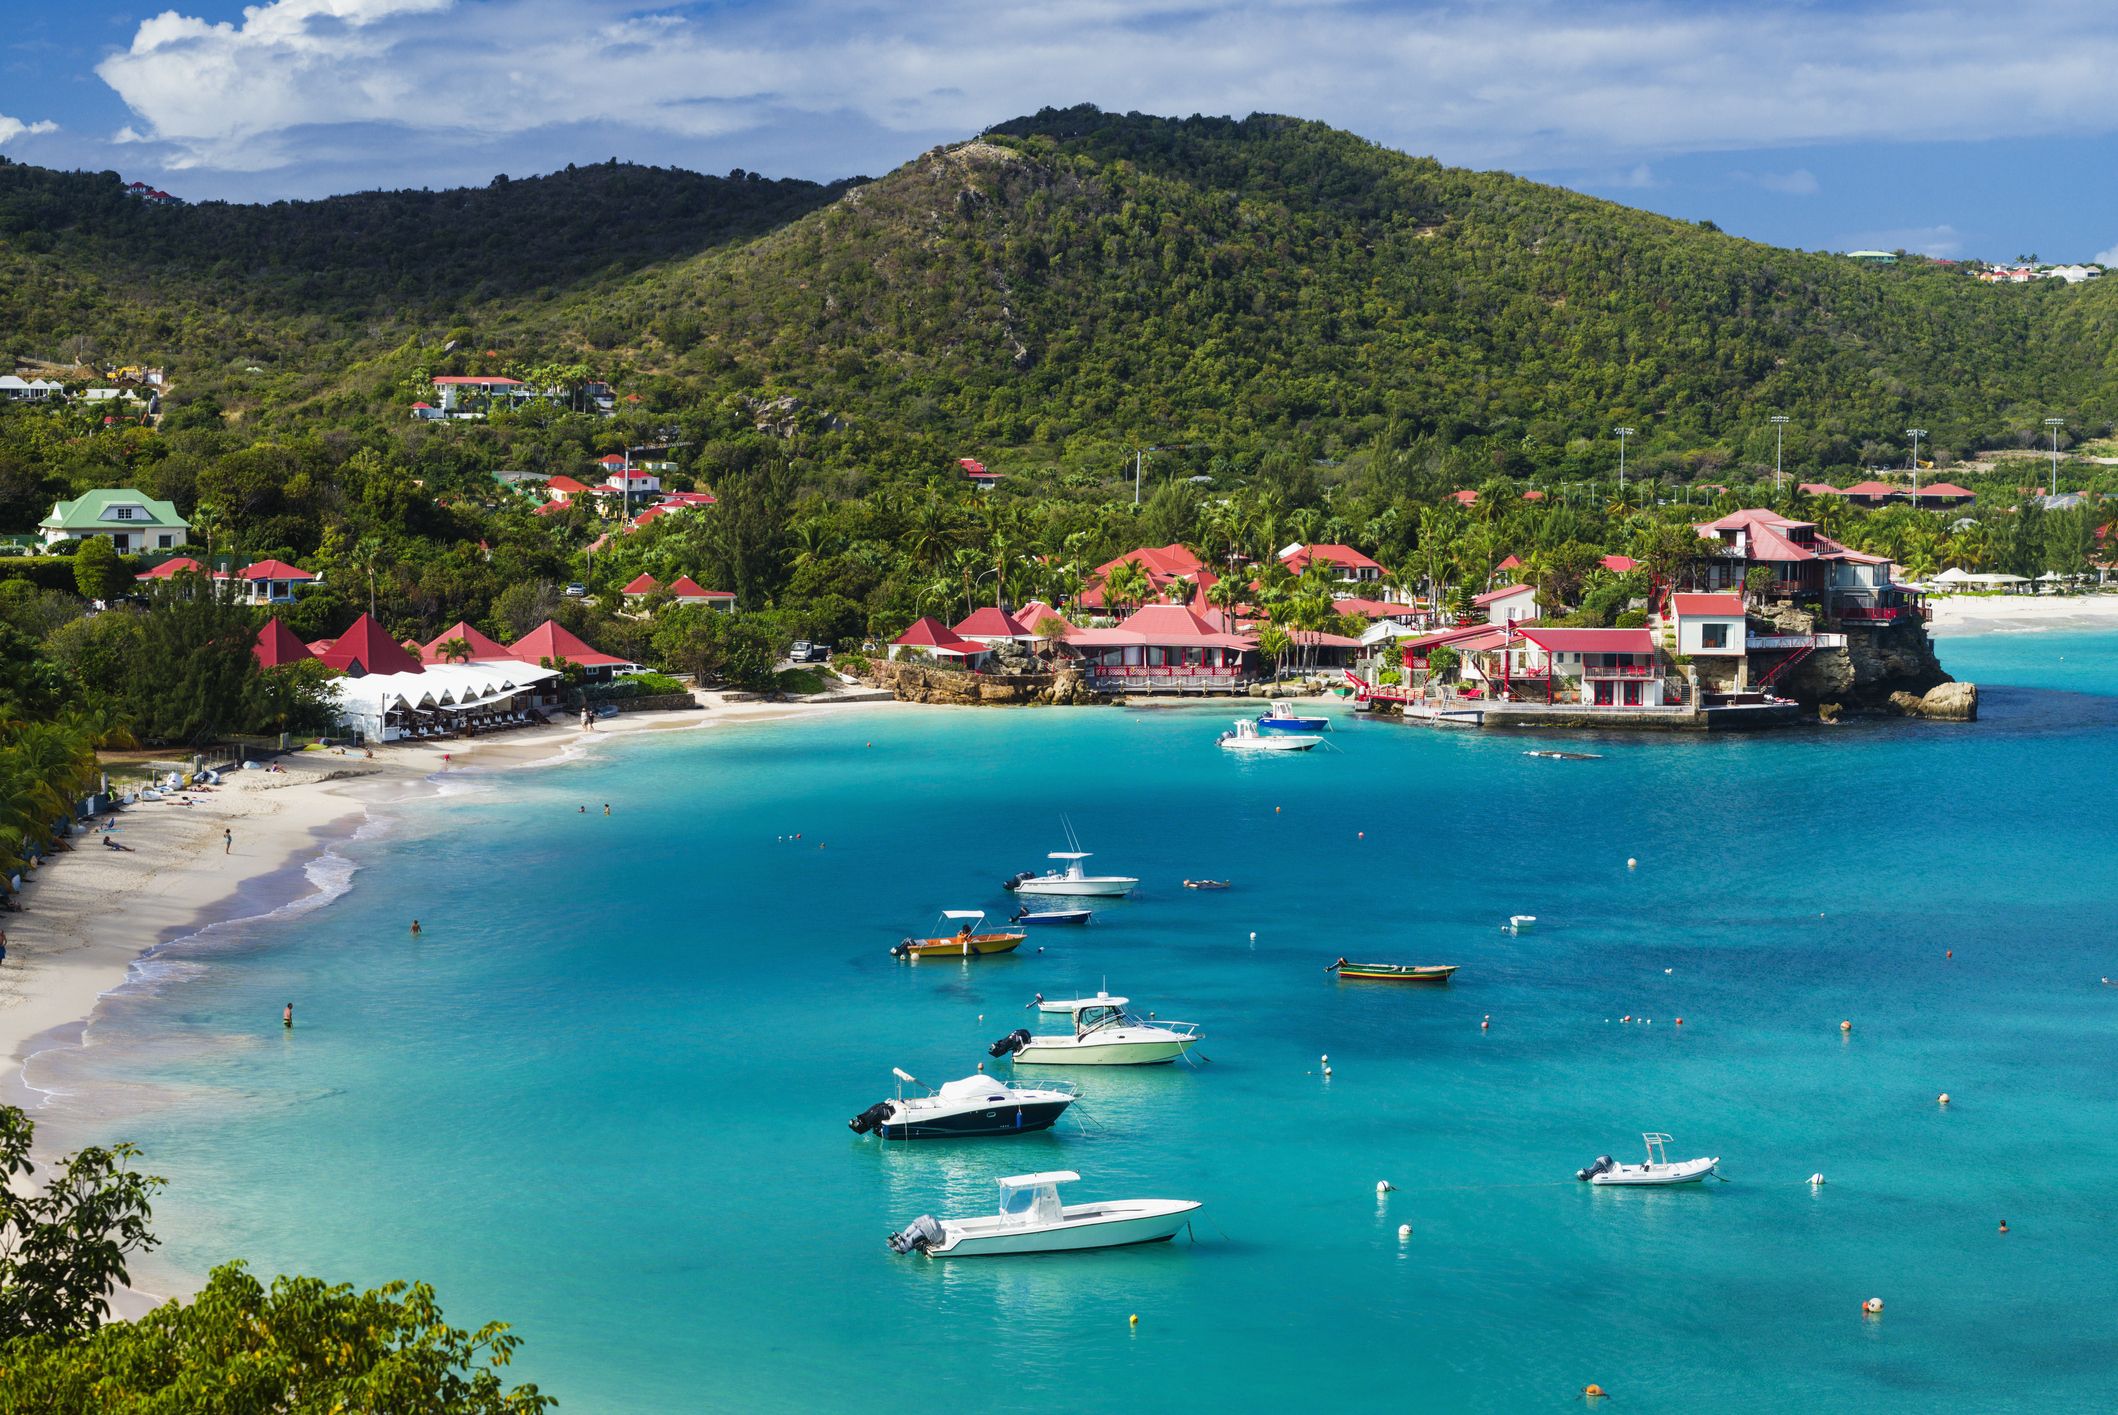 An insider's guide to St Barth's